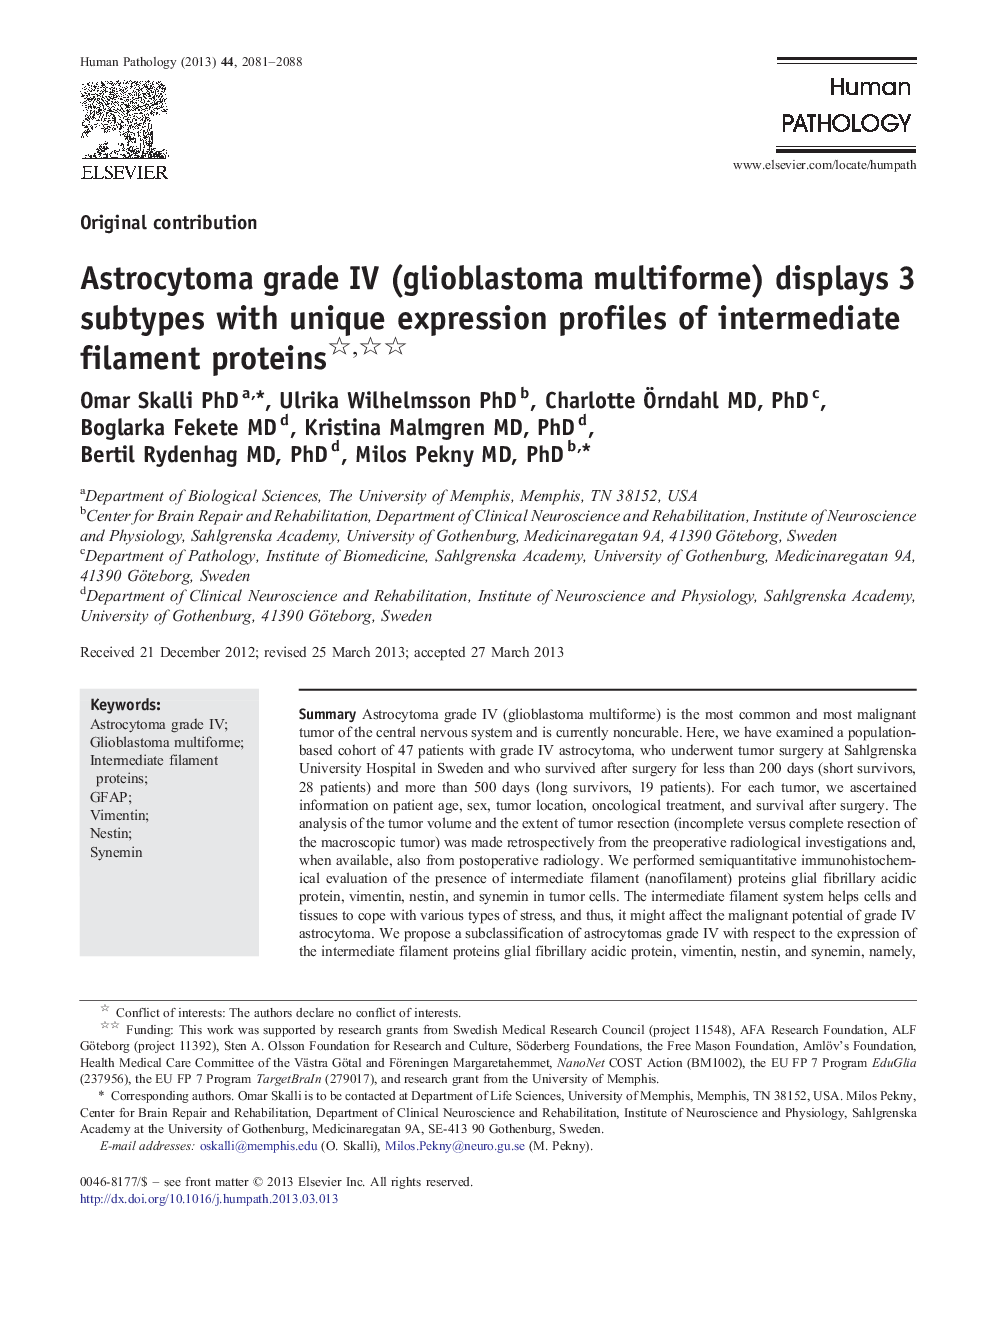 Astrocytoma grade IV (glioblastoma multiforme) displays 3 subtypes with unique expression profiles of intermediate filament proteins 